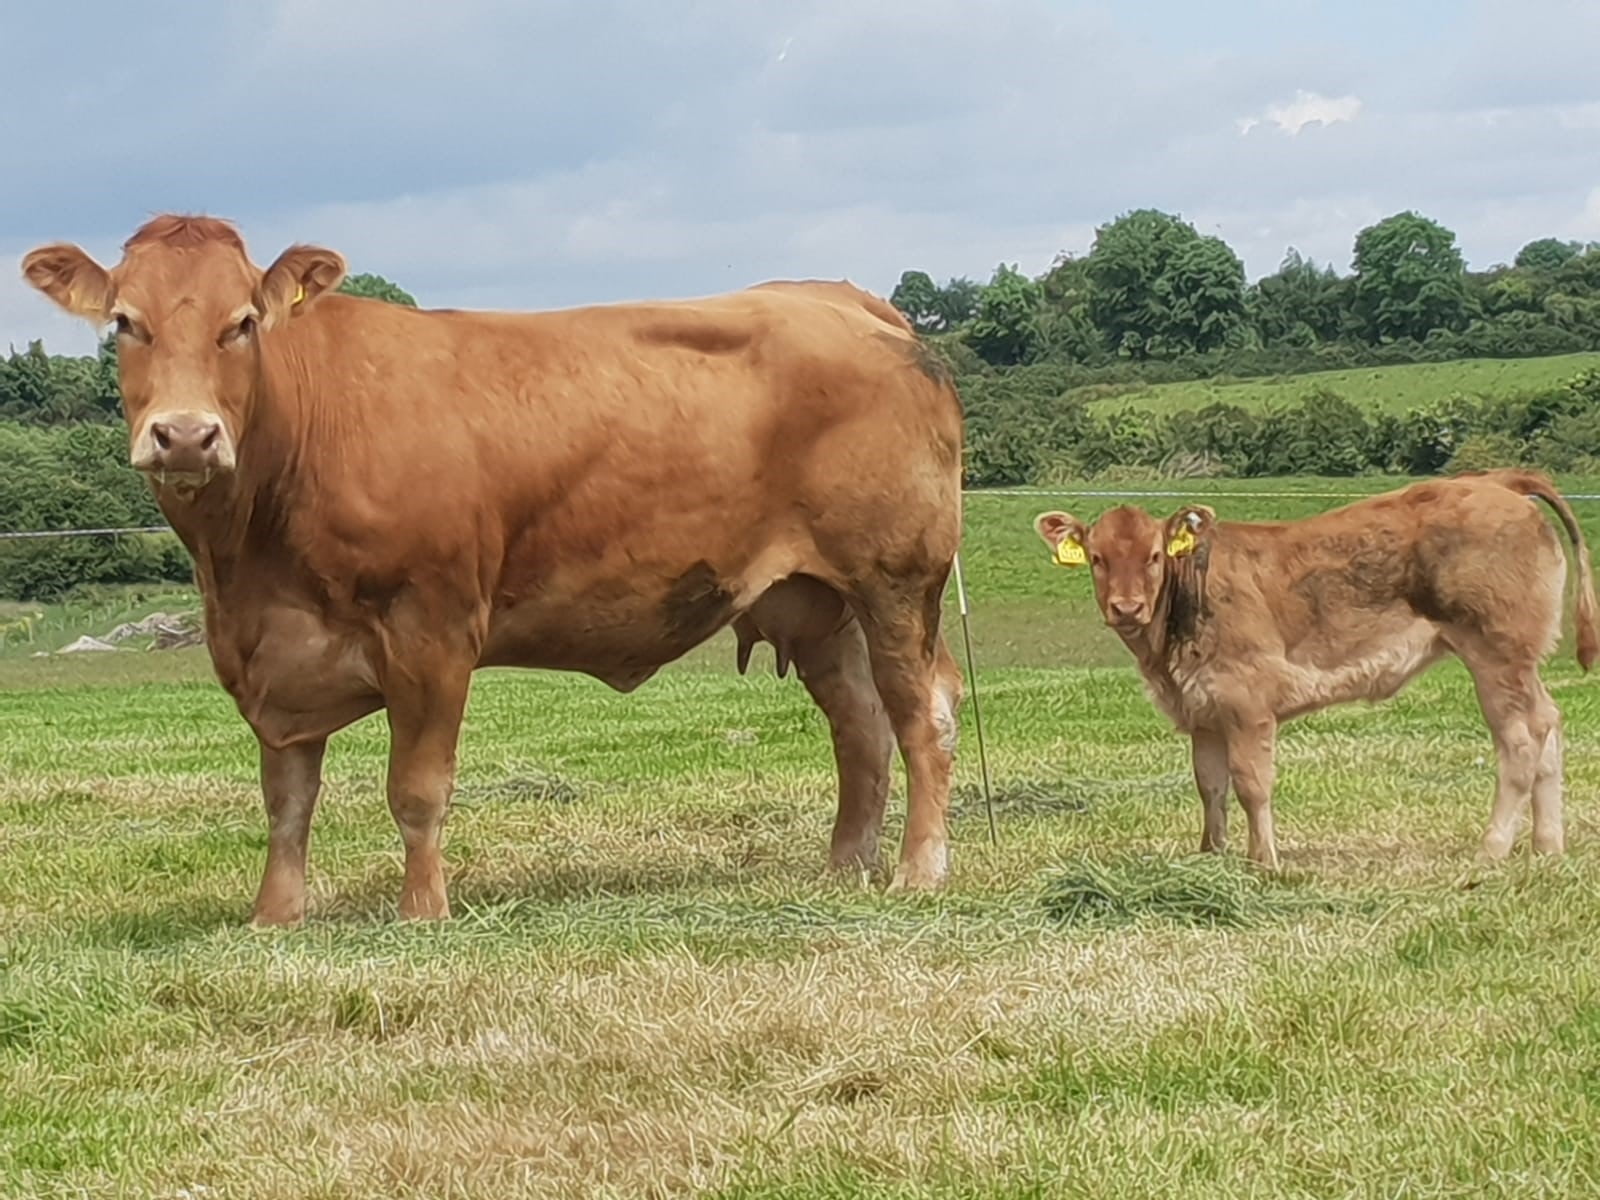 Entries now open for South West Limousin Club Herds Competition